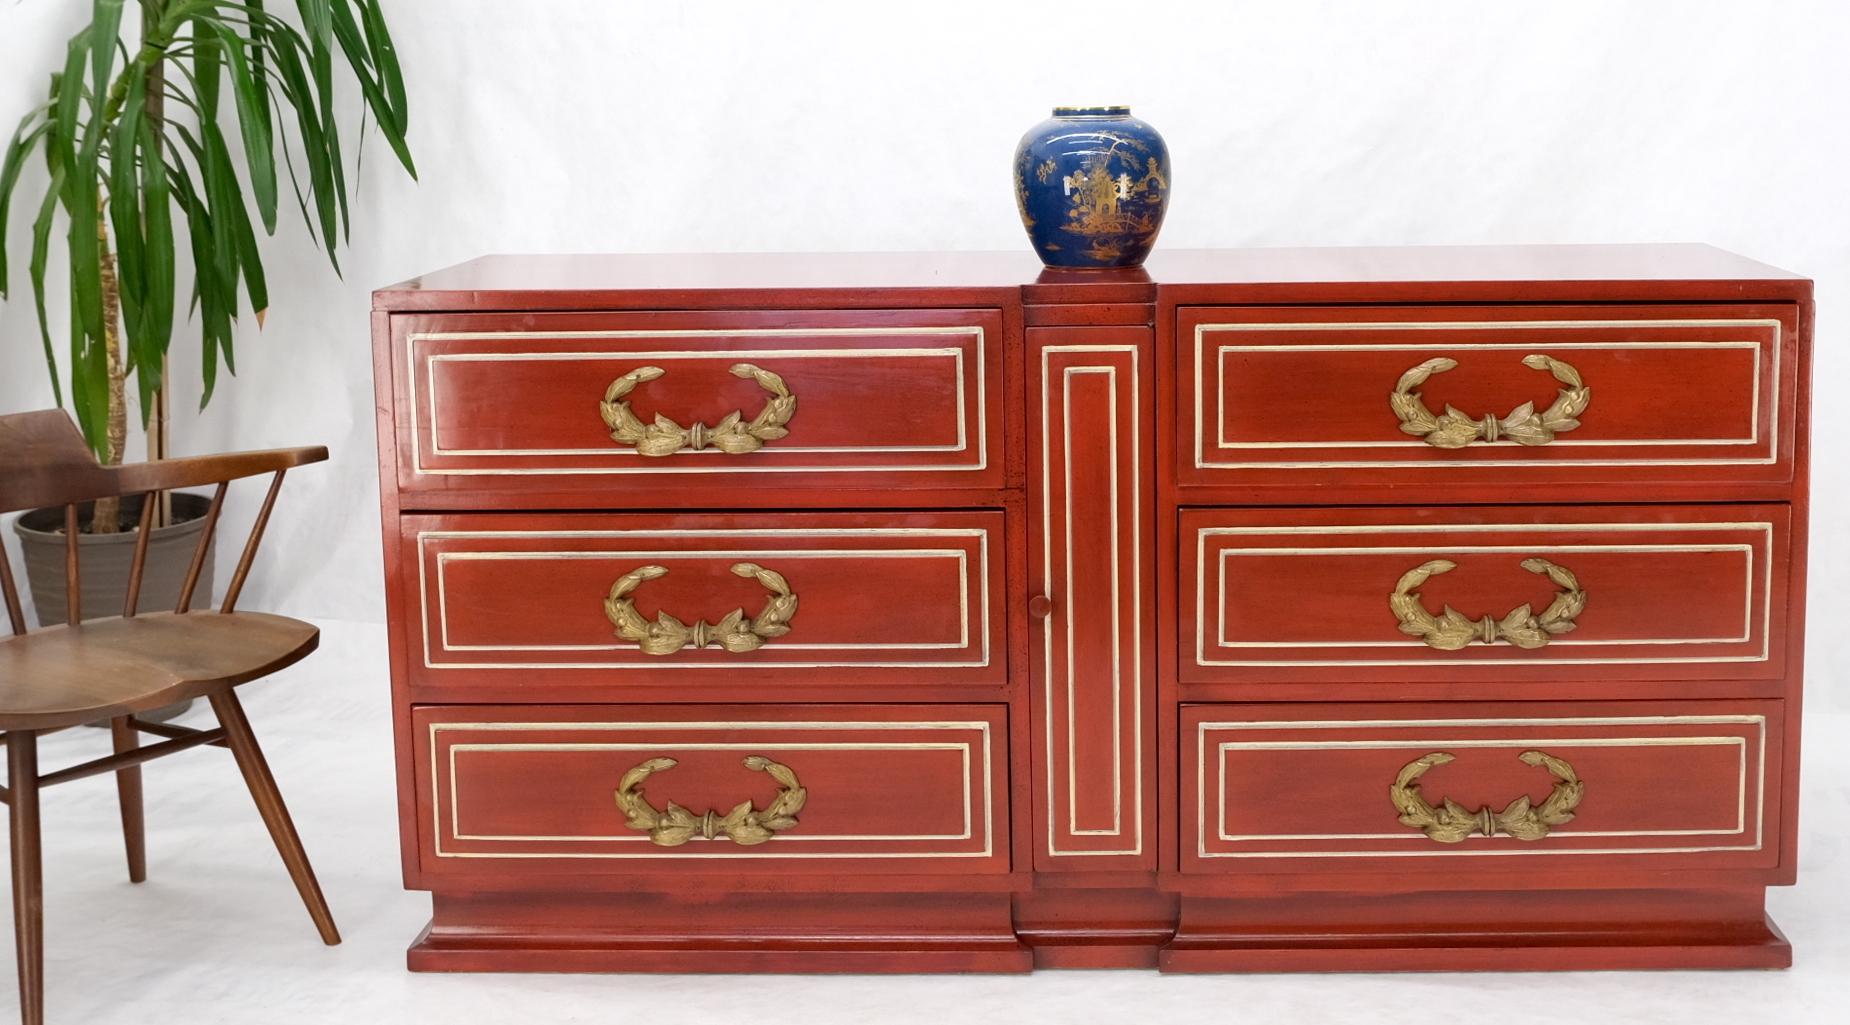 Directoire Style Blood Tomato Red Lacquer Super Heavy Solid Brass Pulls Dresser For Sale 8